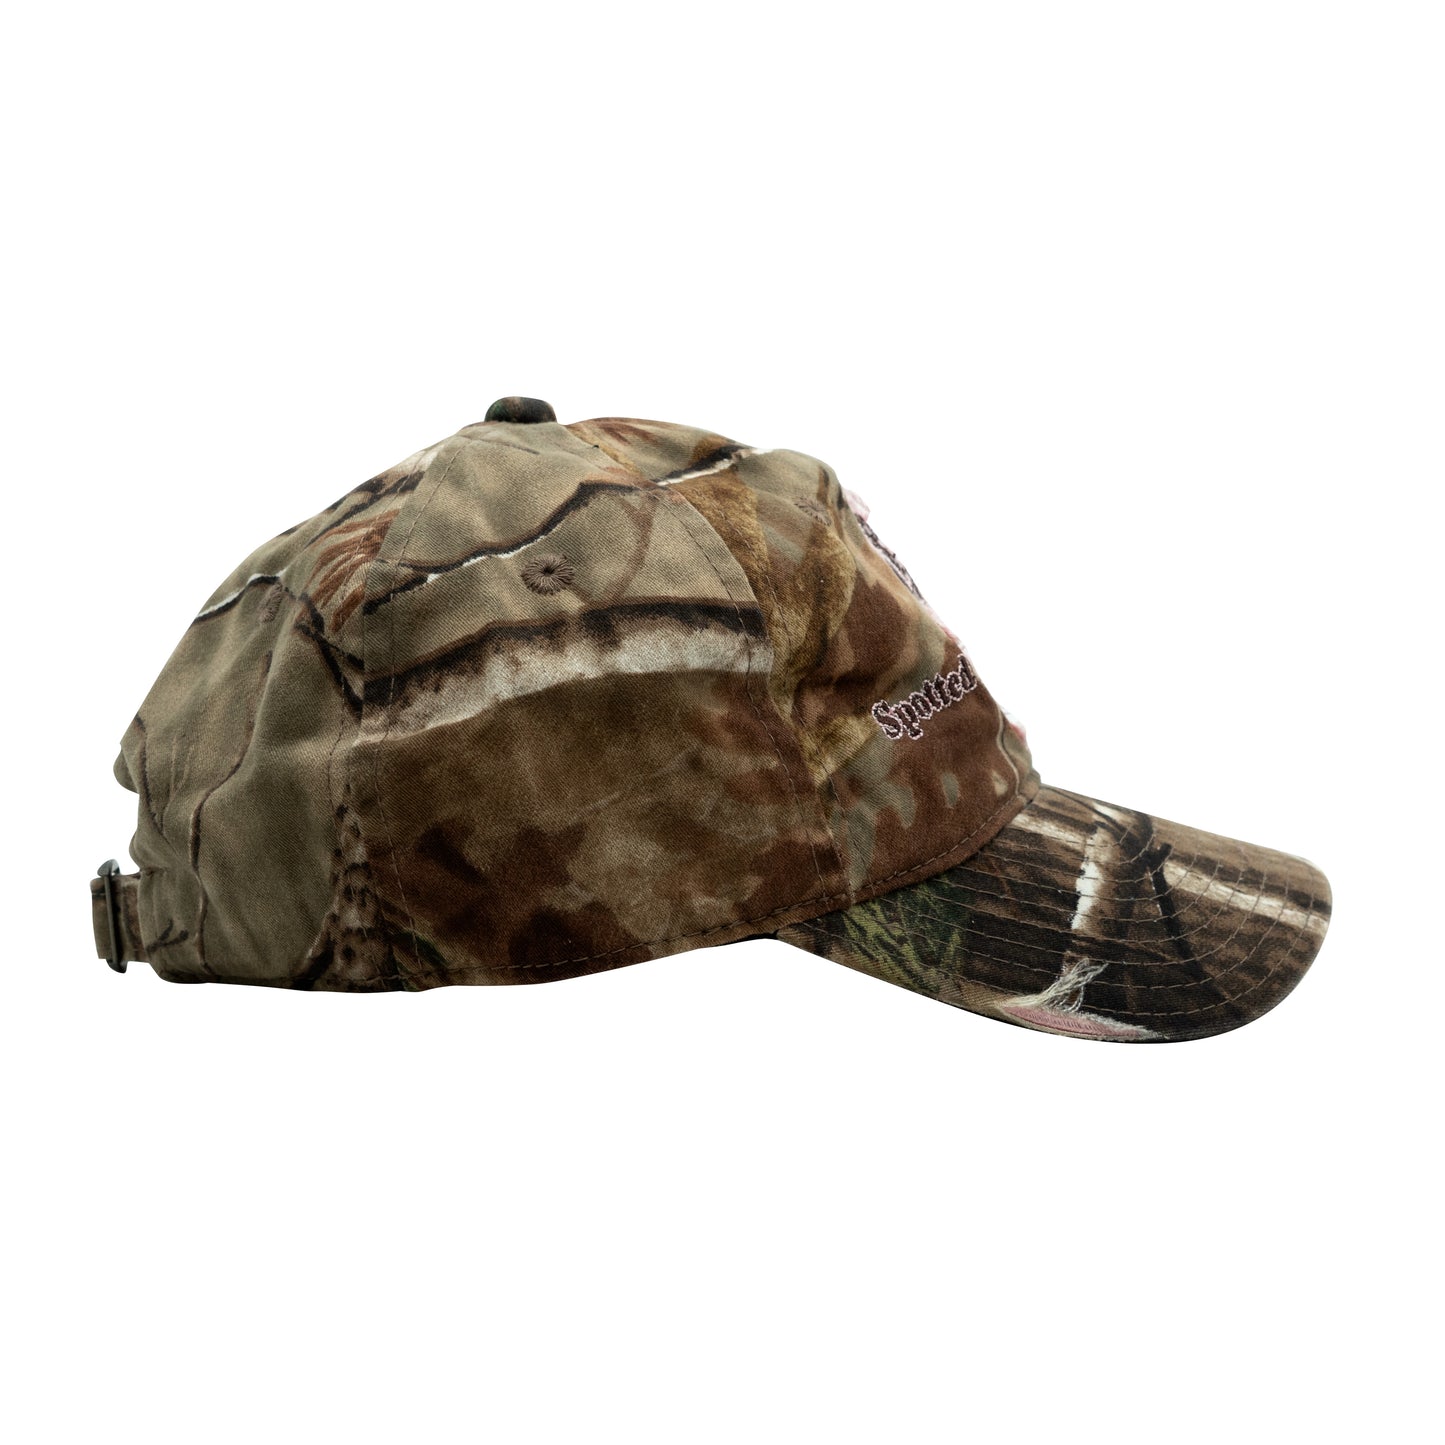 SPOTTED DOG REALTREE CAP